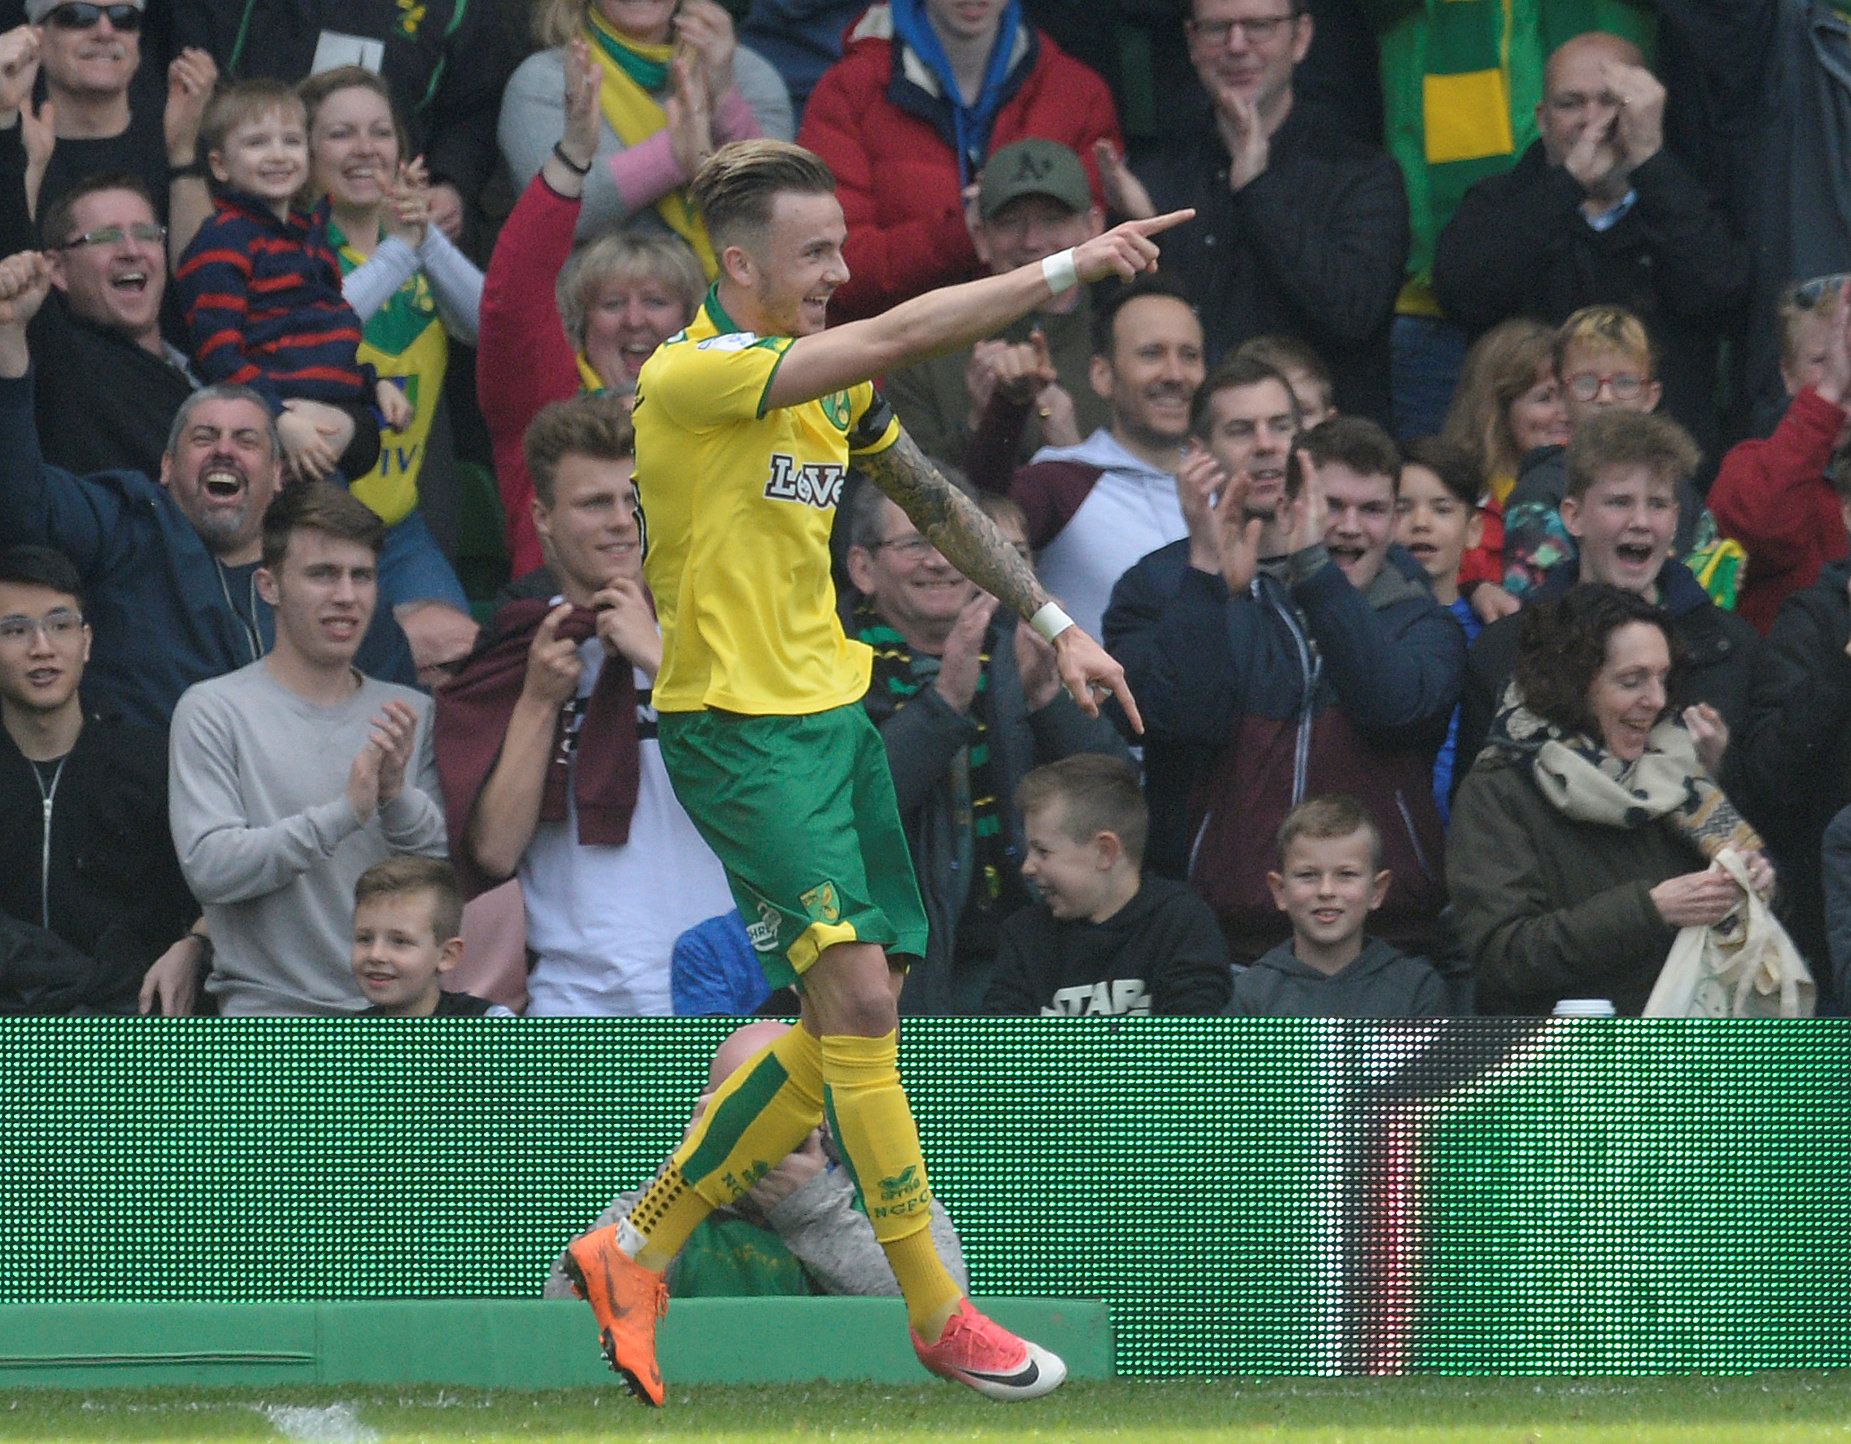 Soccer Football - Championship - Norwich City vs Aston Villa - Carrow Road, Norwich, Britain - April 7, 2018  Norwich's James Maddison celebrates scoring their third goal     Action Images/Alan Walter  EDITORIAL USE ONLY. No use with unauthorized audio, video, data, fixture lists, club/league logos or 